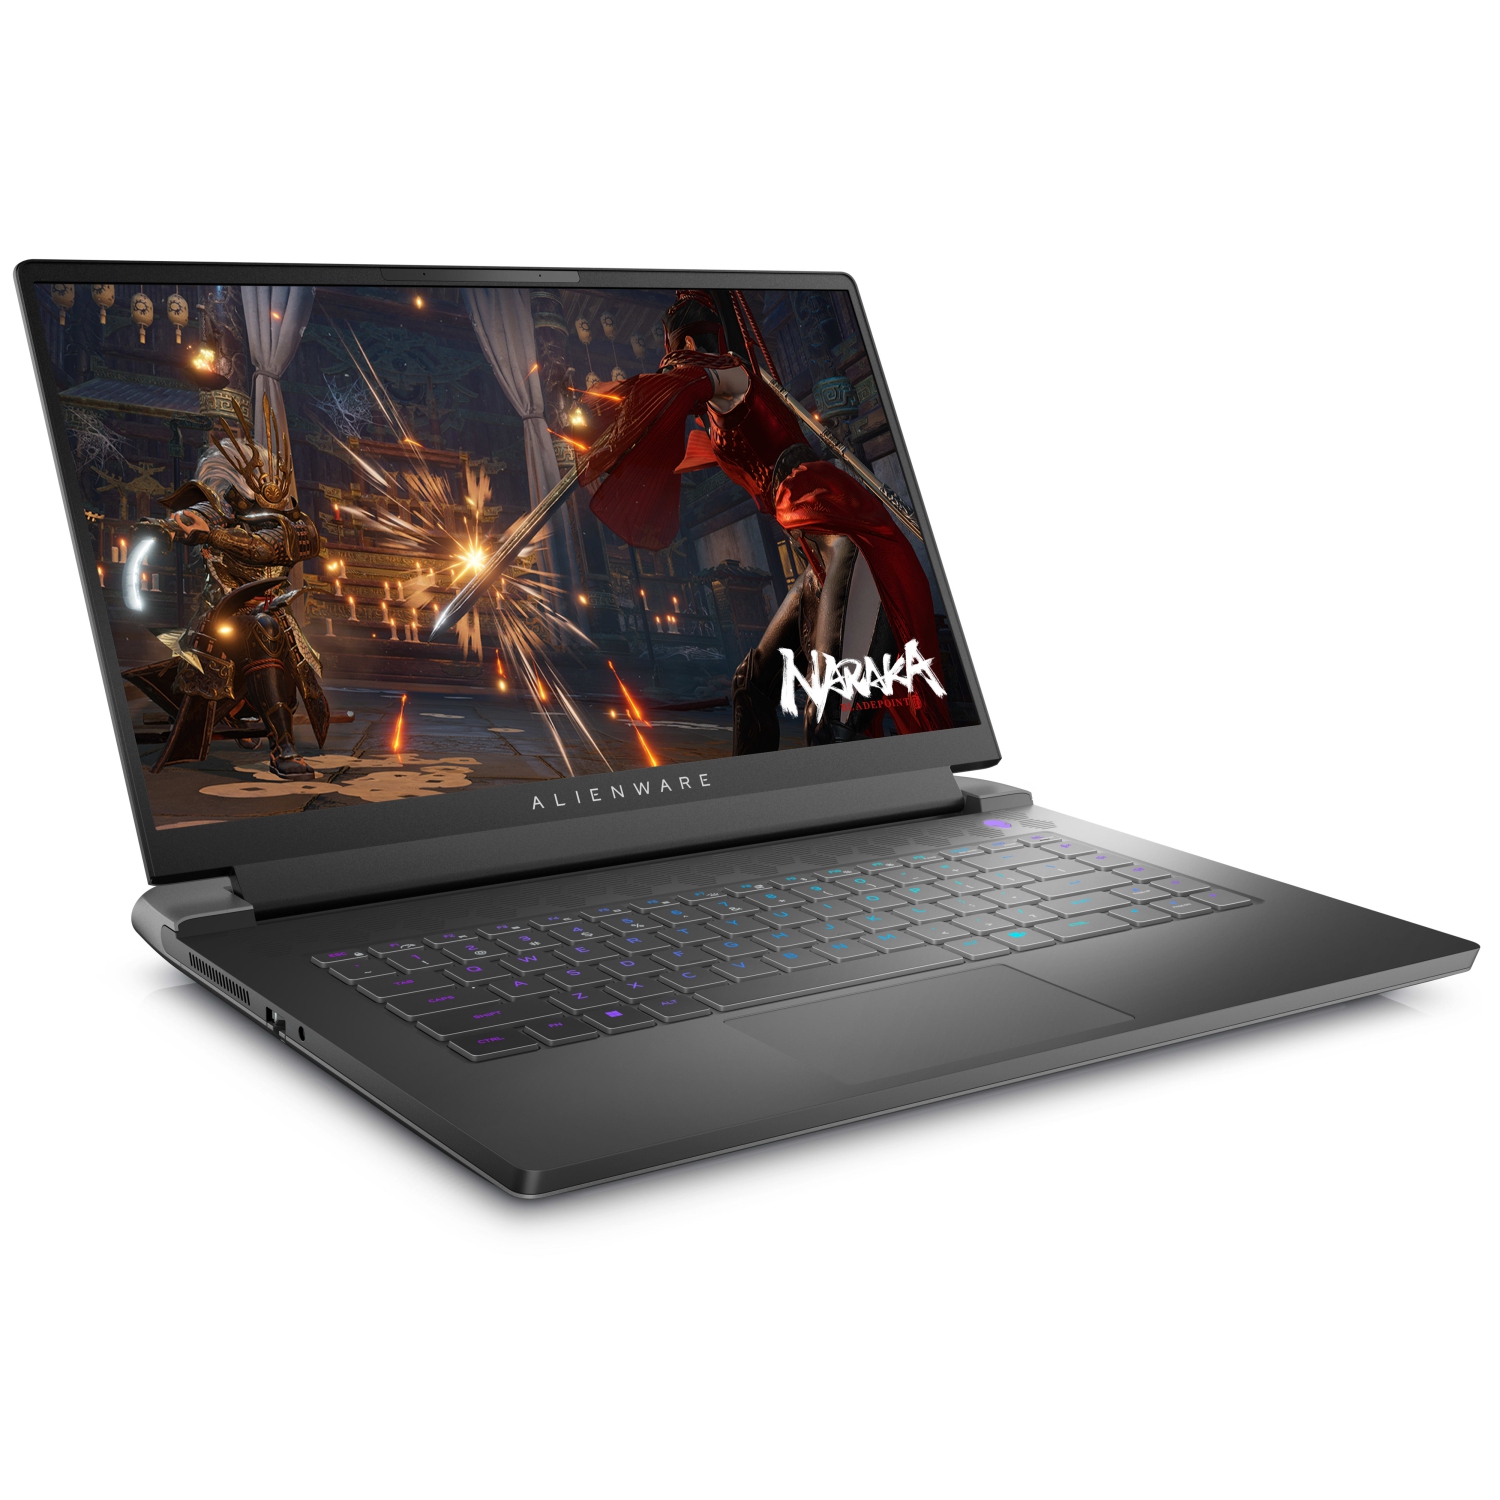 Refurbished (Excellent) – Dell Alienware m15 R7 Gaming Laptop (2022) | 15.6" FHD | Core i7 - 512GB SSD - 32GB RAM - 3070 Ti | 14 Cores @ 4.7 GHz - 12th Gen CPU - 8GB GDDR6X